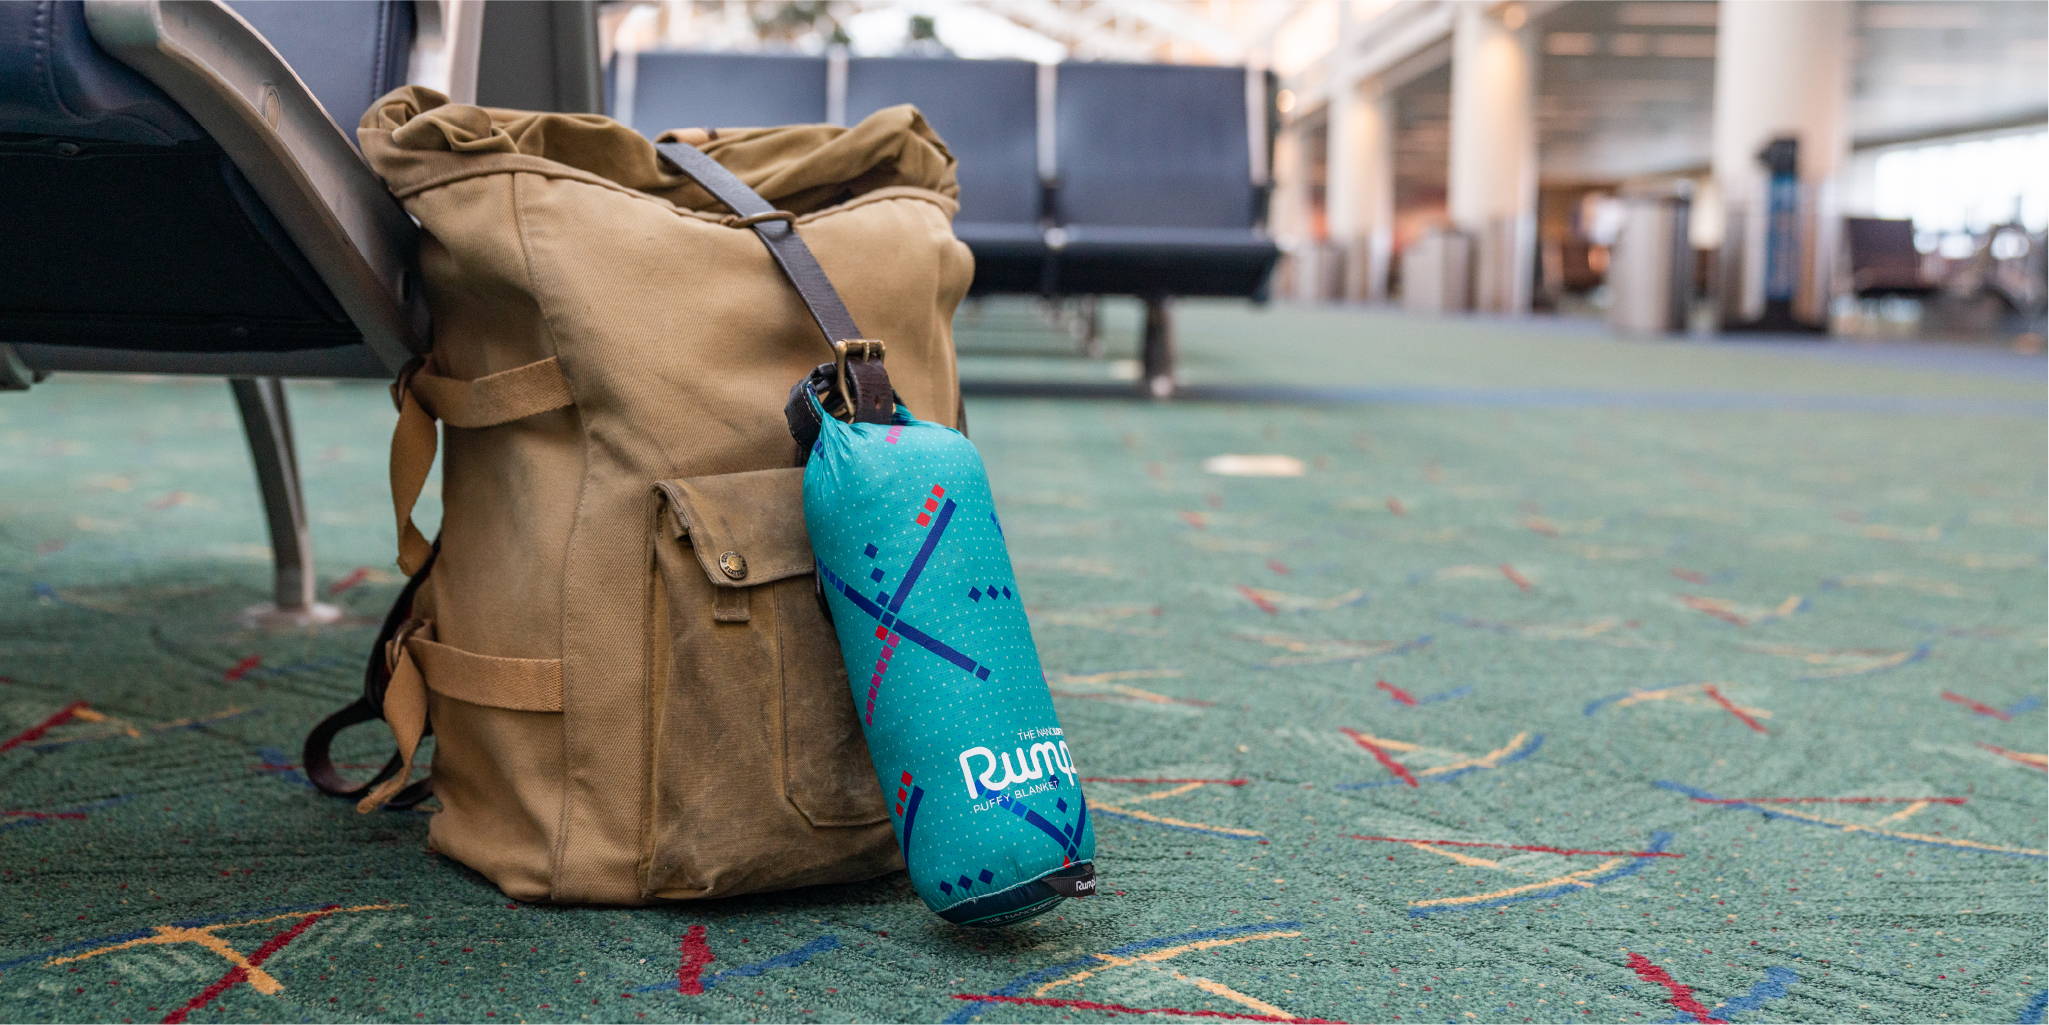 PDx Travel Blanket hooked on to backpack in PDX airport